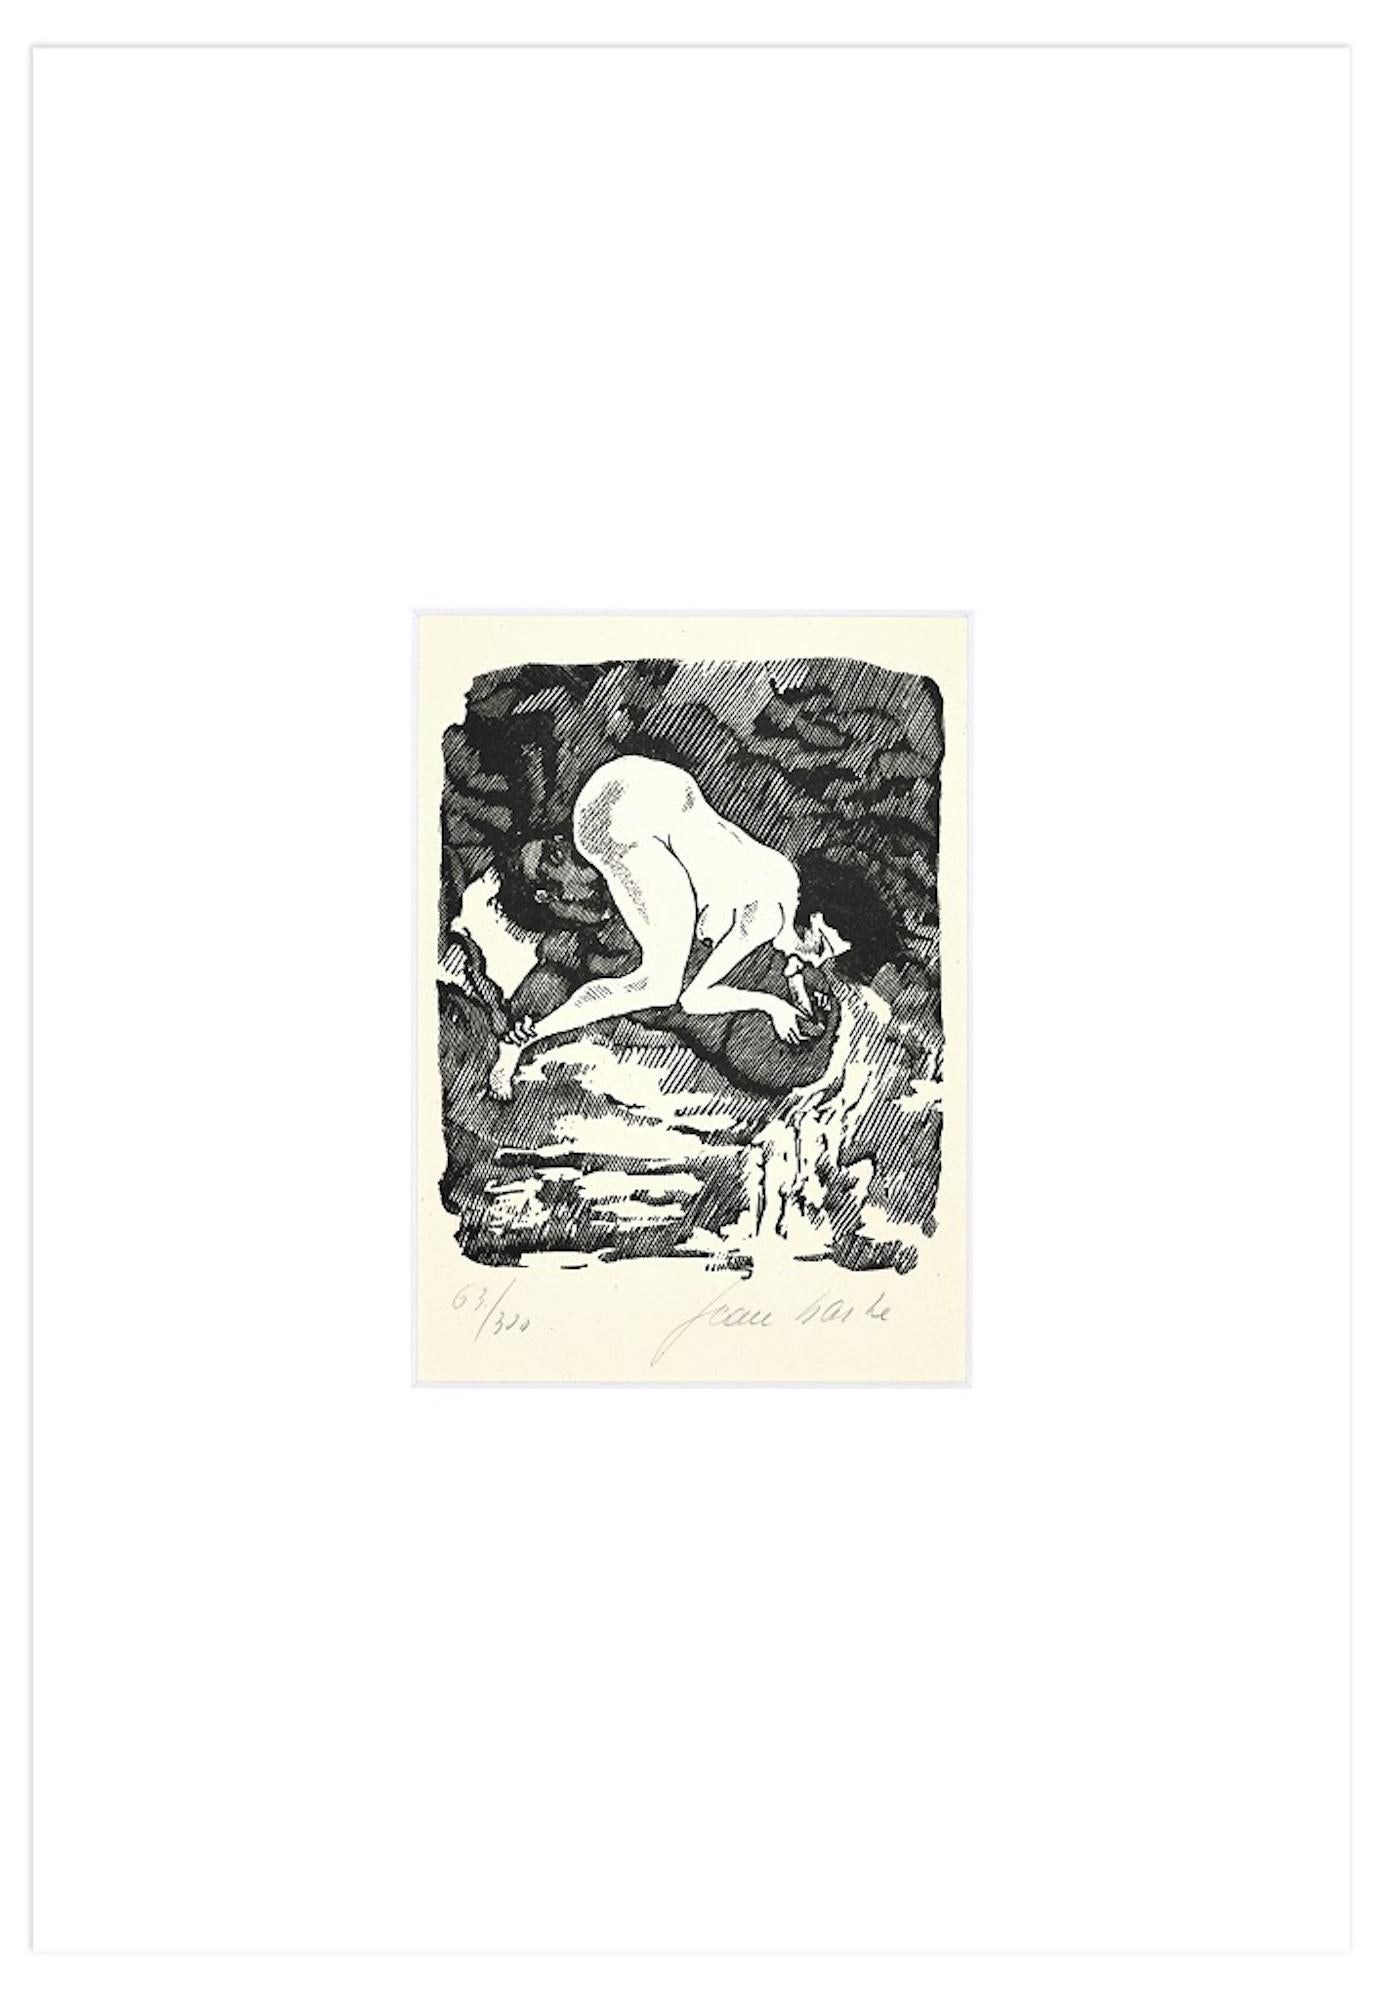 Pleasure is a beautiful black and white linocut on ivory-colored paper, realized in 1945 by Mino Maccari.

Hand-signed 